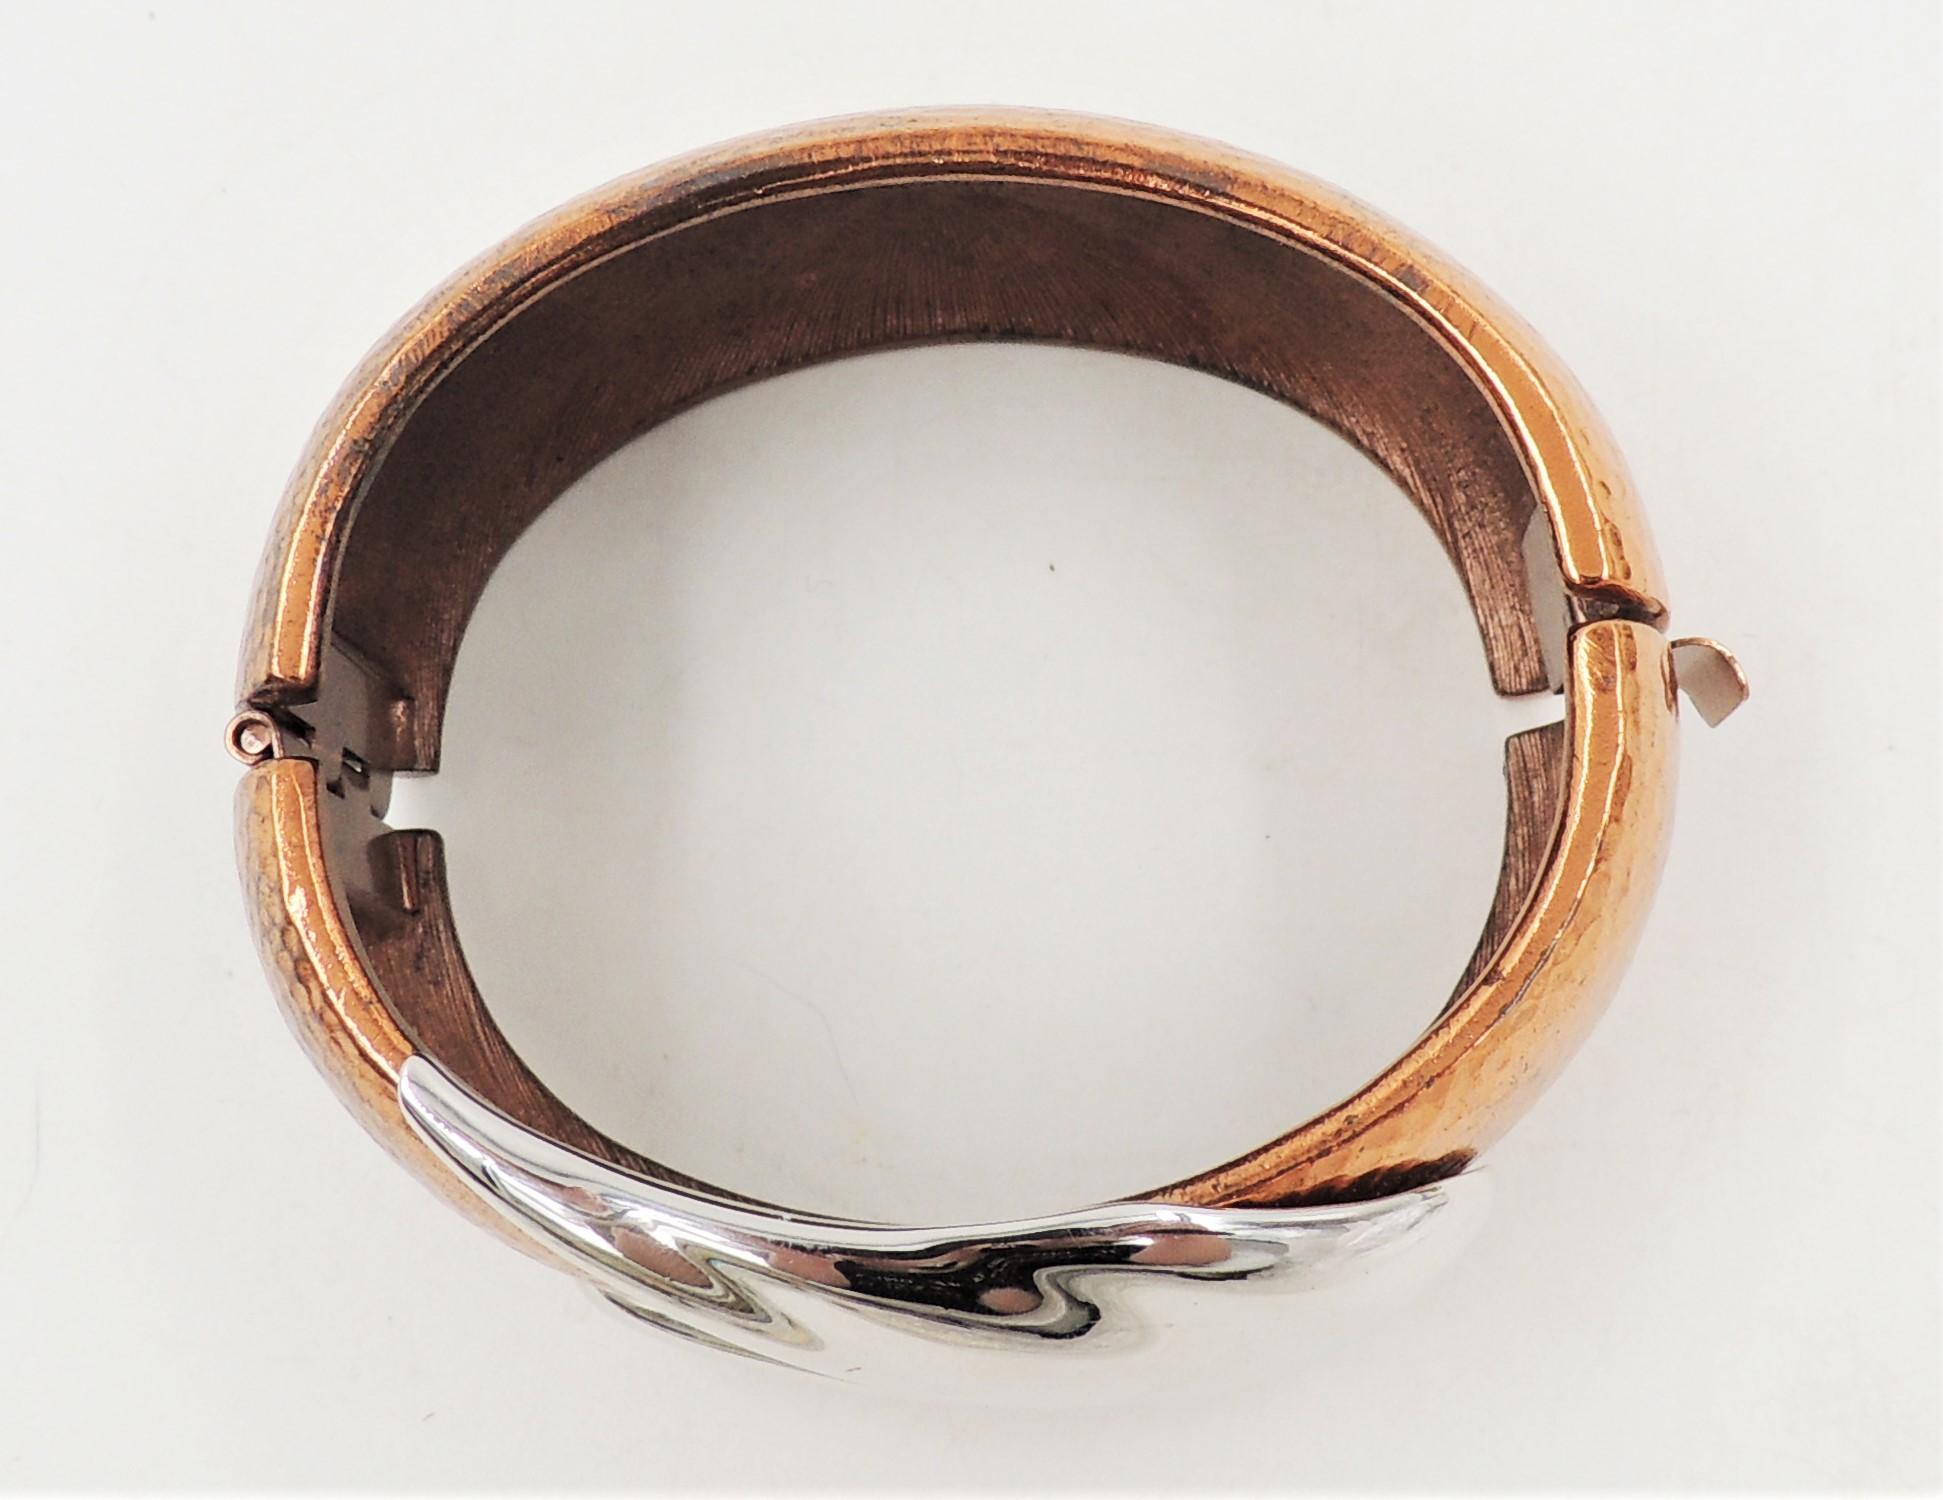 Vintage Monet Hammered Copper Plate & Rhodium Plate Cuff Bracelet, 1985 Ad Piece In Good Condition For Sale In Easton, PA